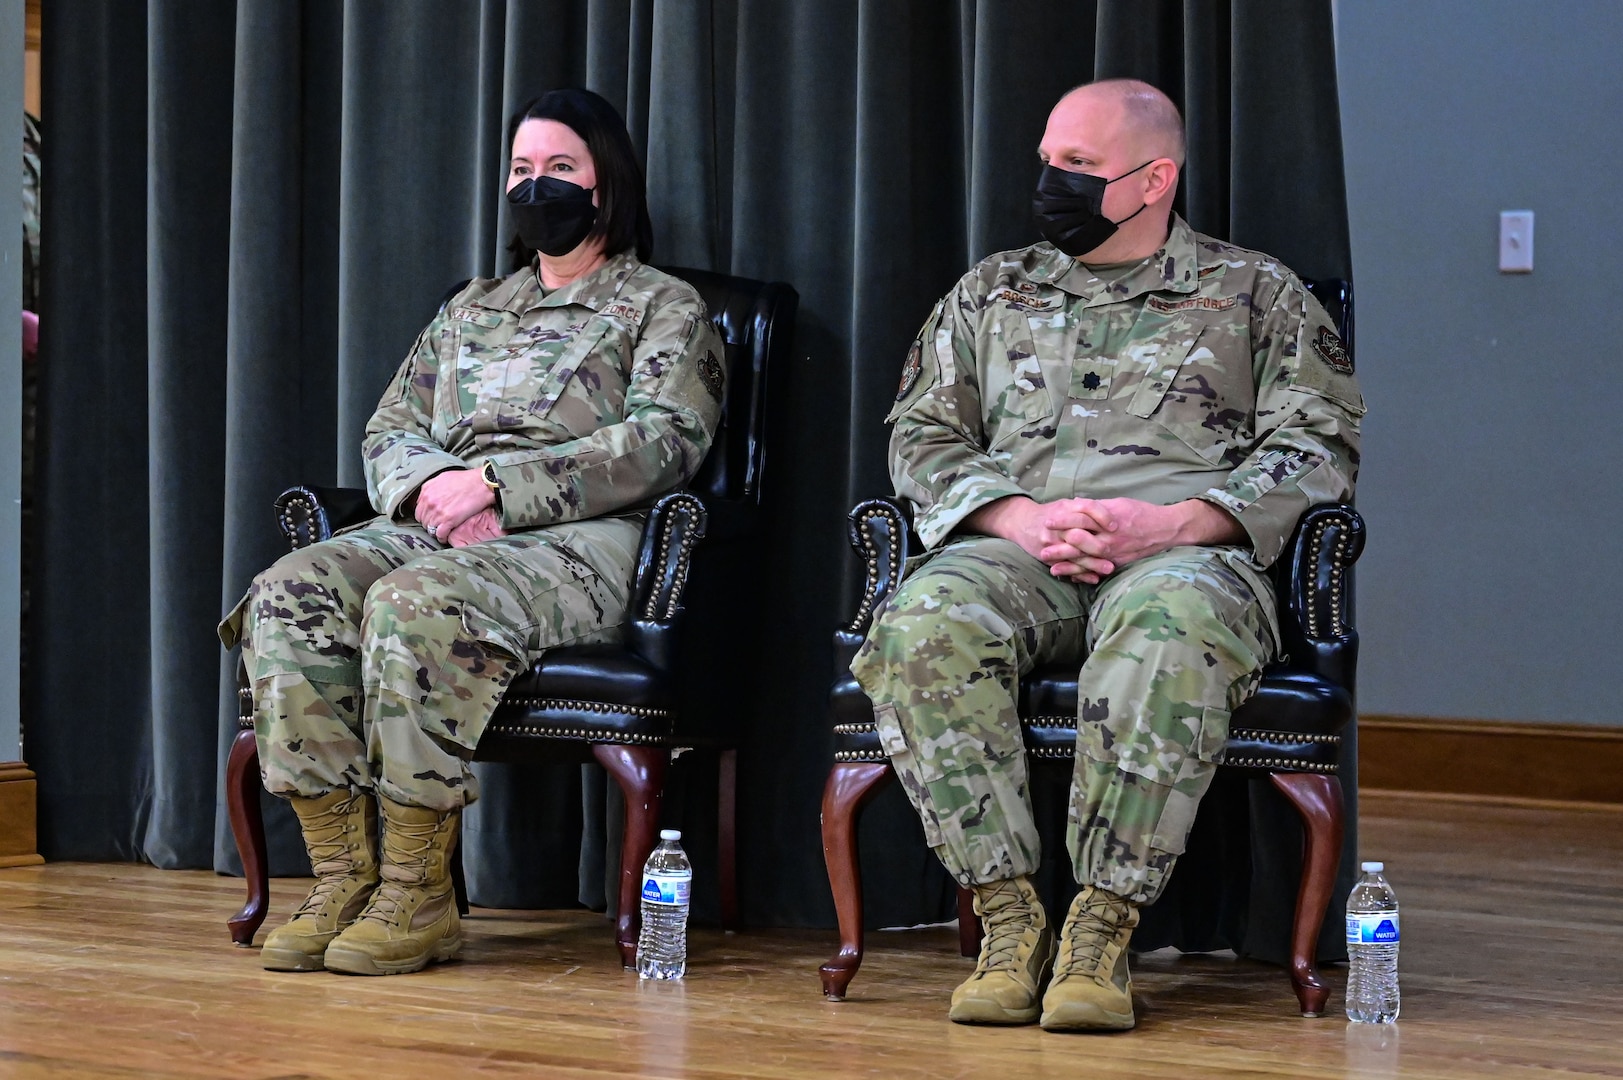 Col. Jennifer Bratz, 19th Medical Group commander, left, and Lt. Col. Randolph Bosch, former 19th Medical Support Squadron commander, right, attend the 19th MDSS inactivation ceremony